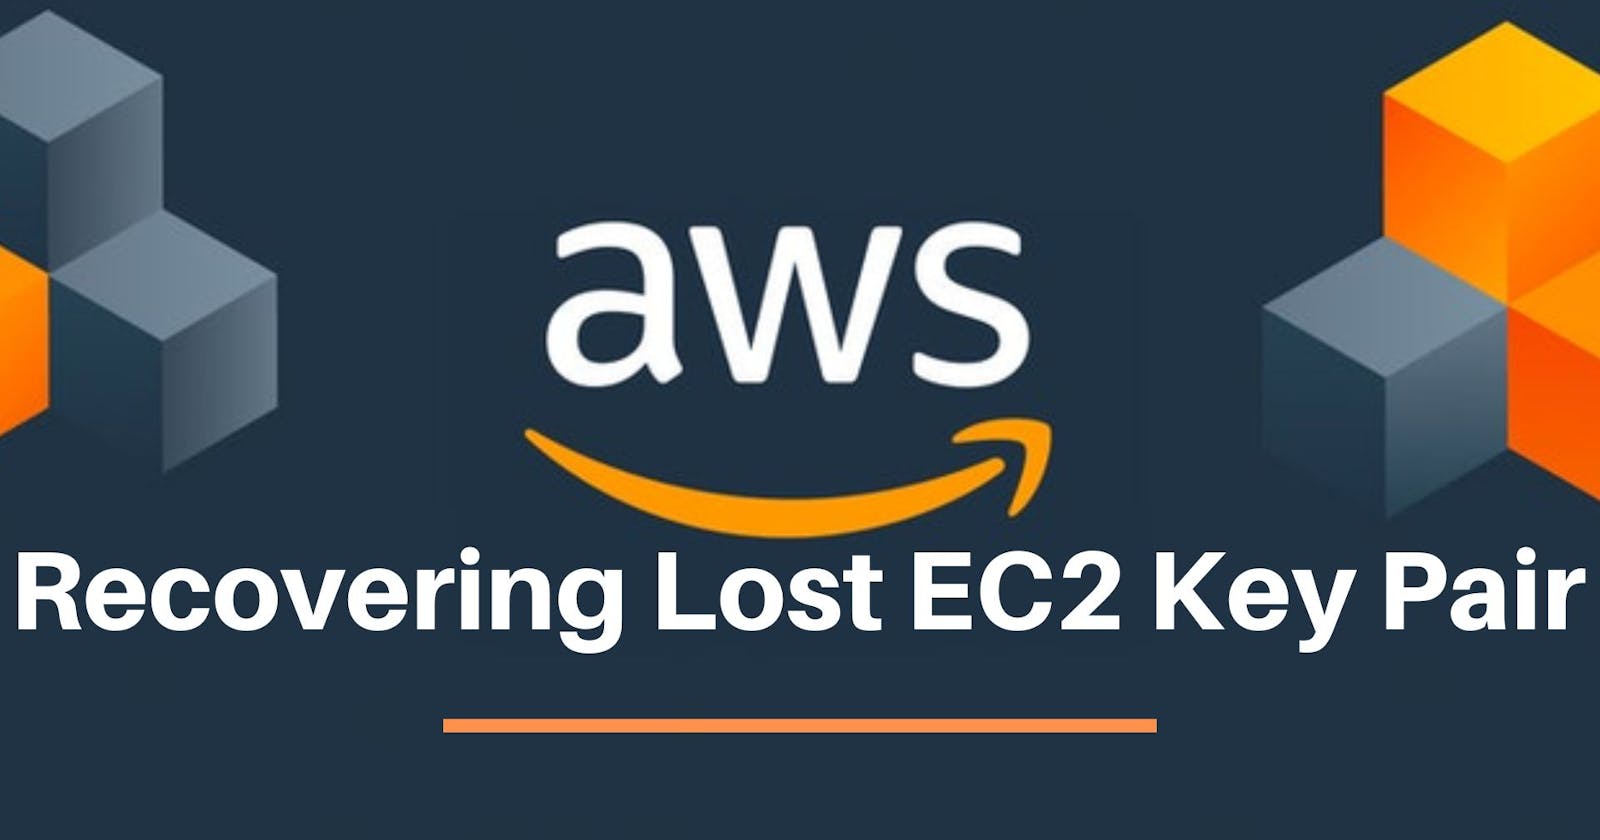 Recovering Lost EC2 Key Pair: A Step-by-Step Guide to Creating a New Key Pair